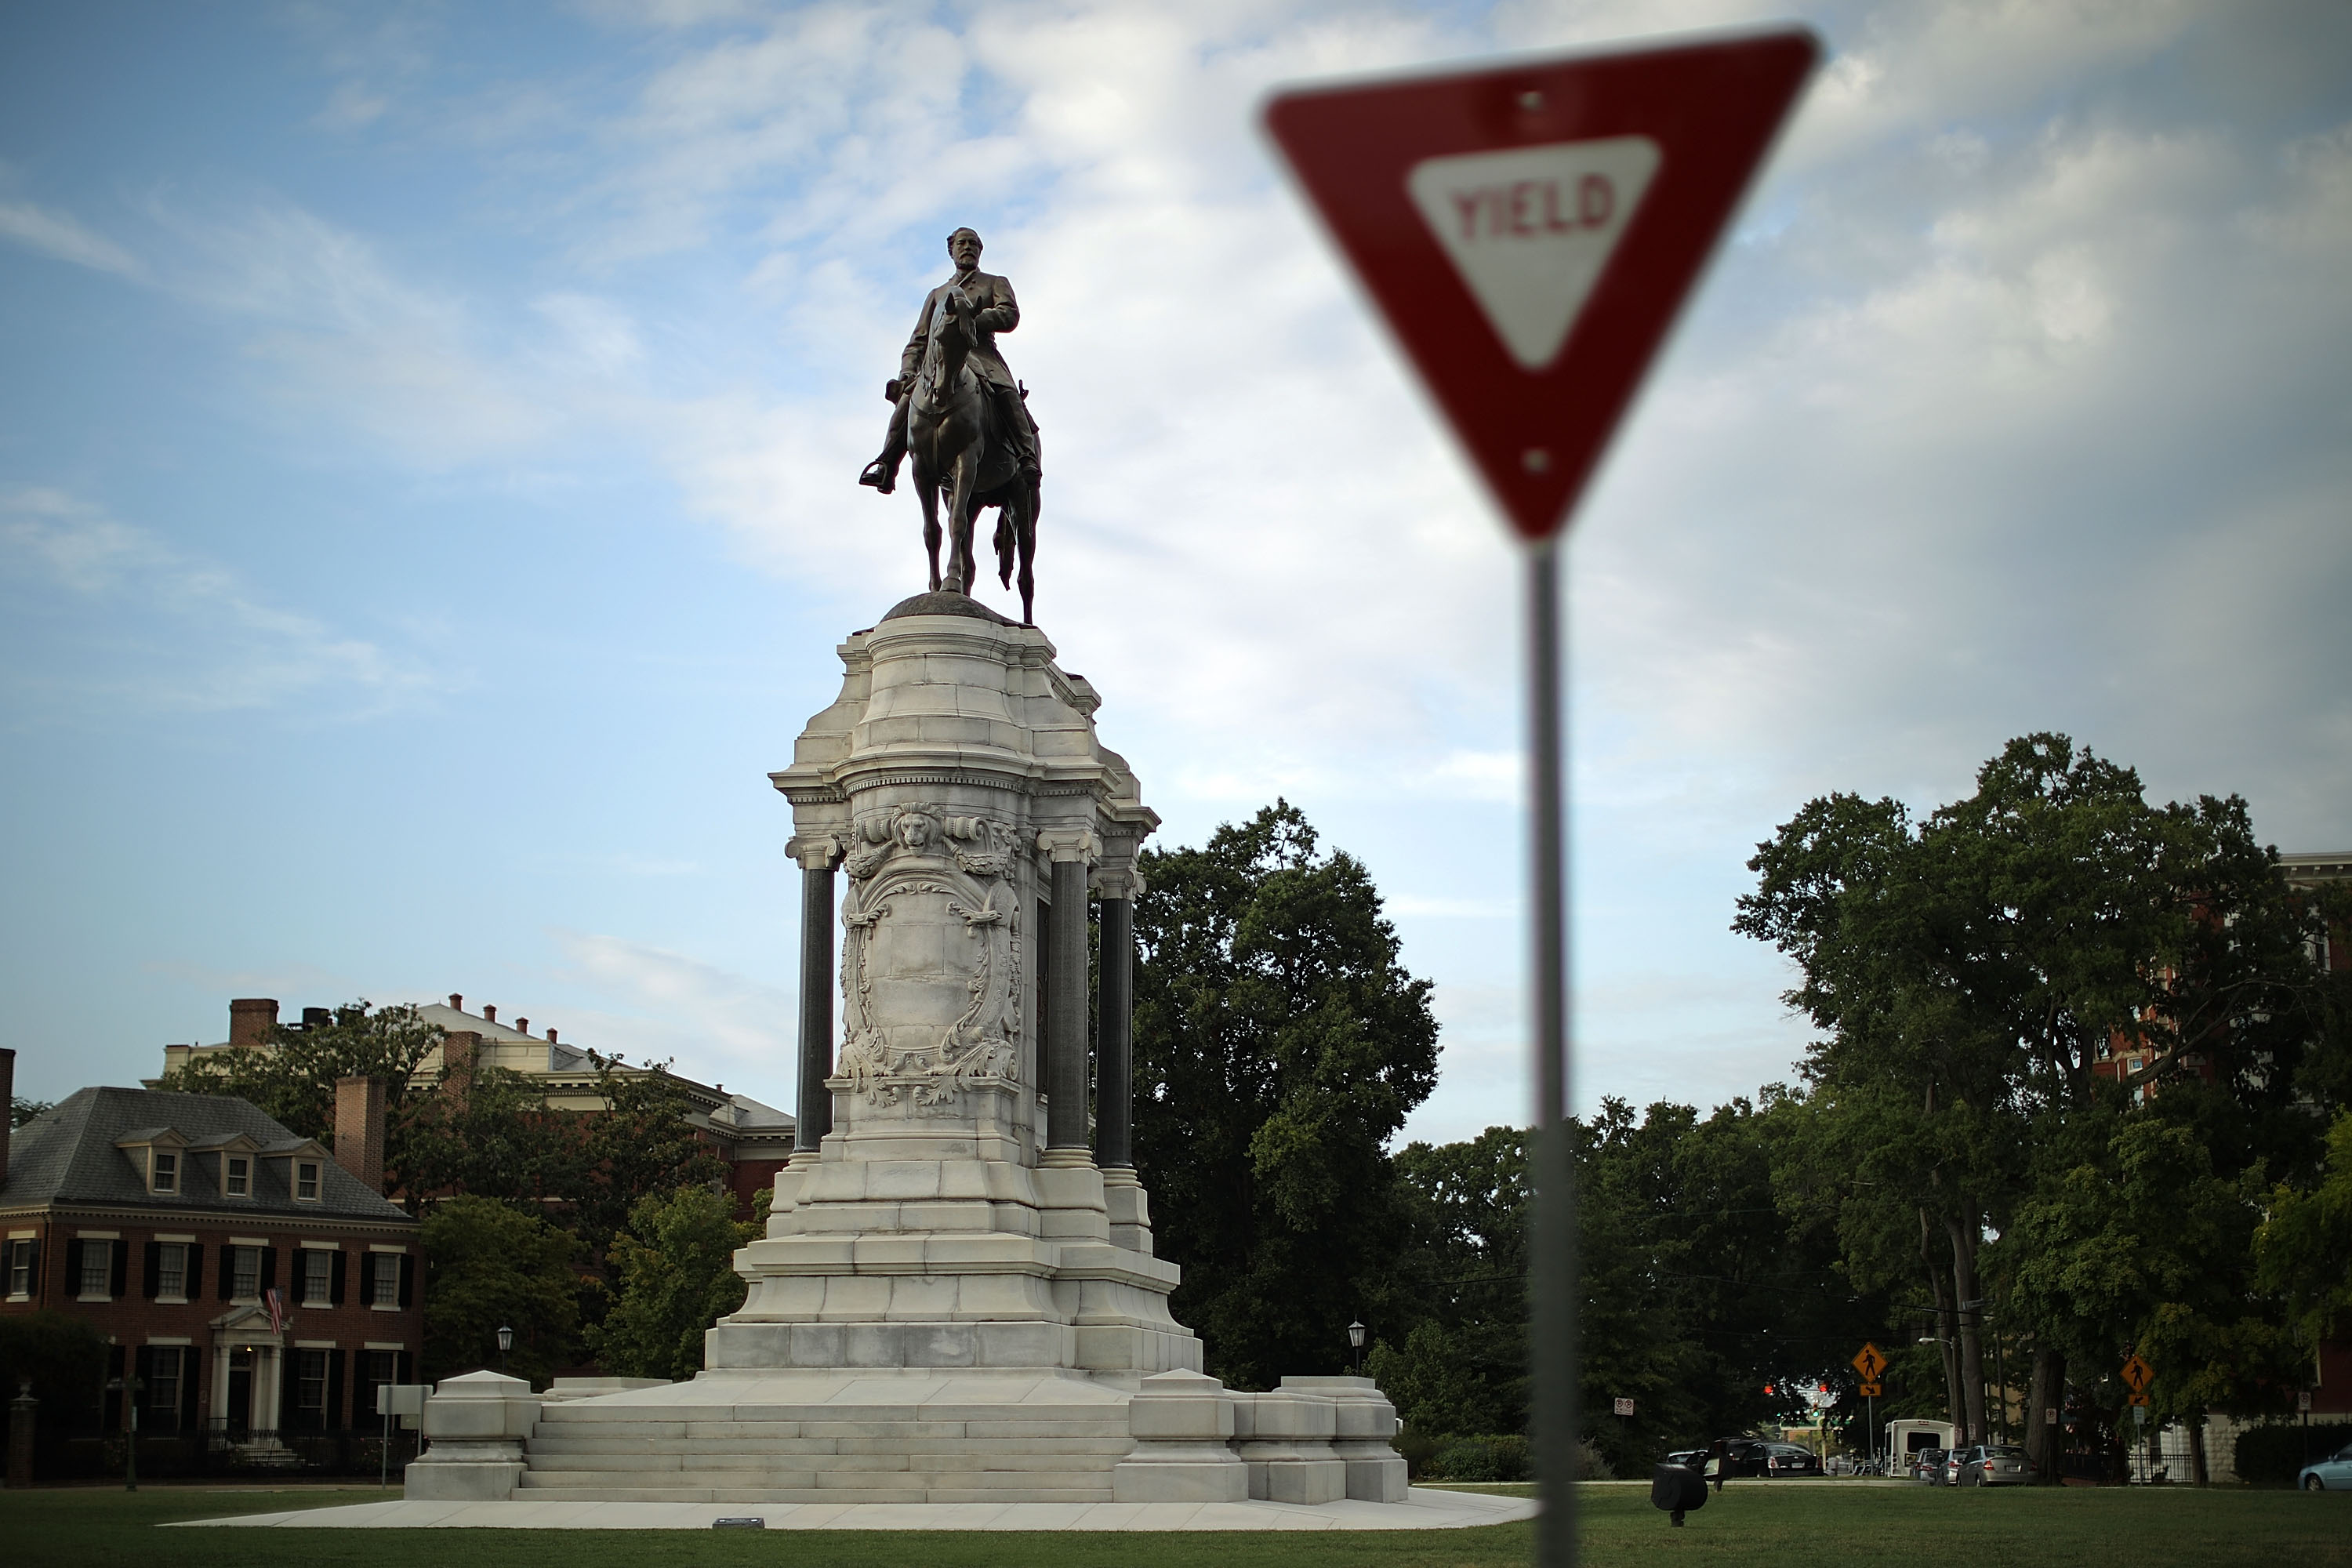 A statue of Confederate General Robert E. Lee, unveild in 1890, stands at the center of Lee Circle along Monument Avenue August 23, 2017 in Richmond, Virginia. (Photo by Chip Somodevilla/Getty Images)